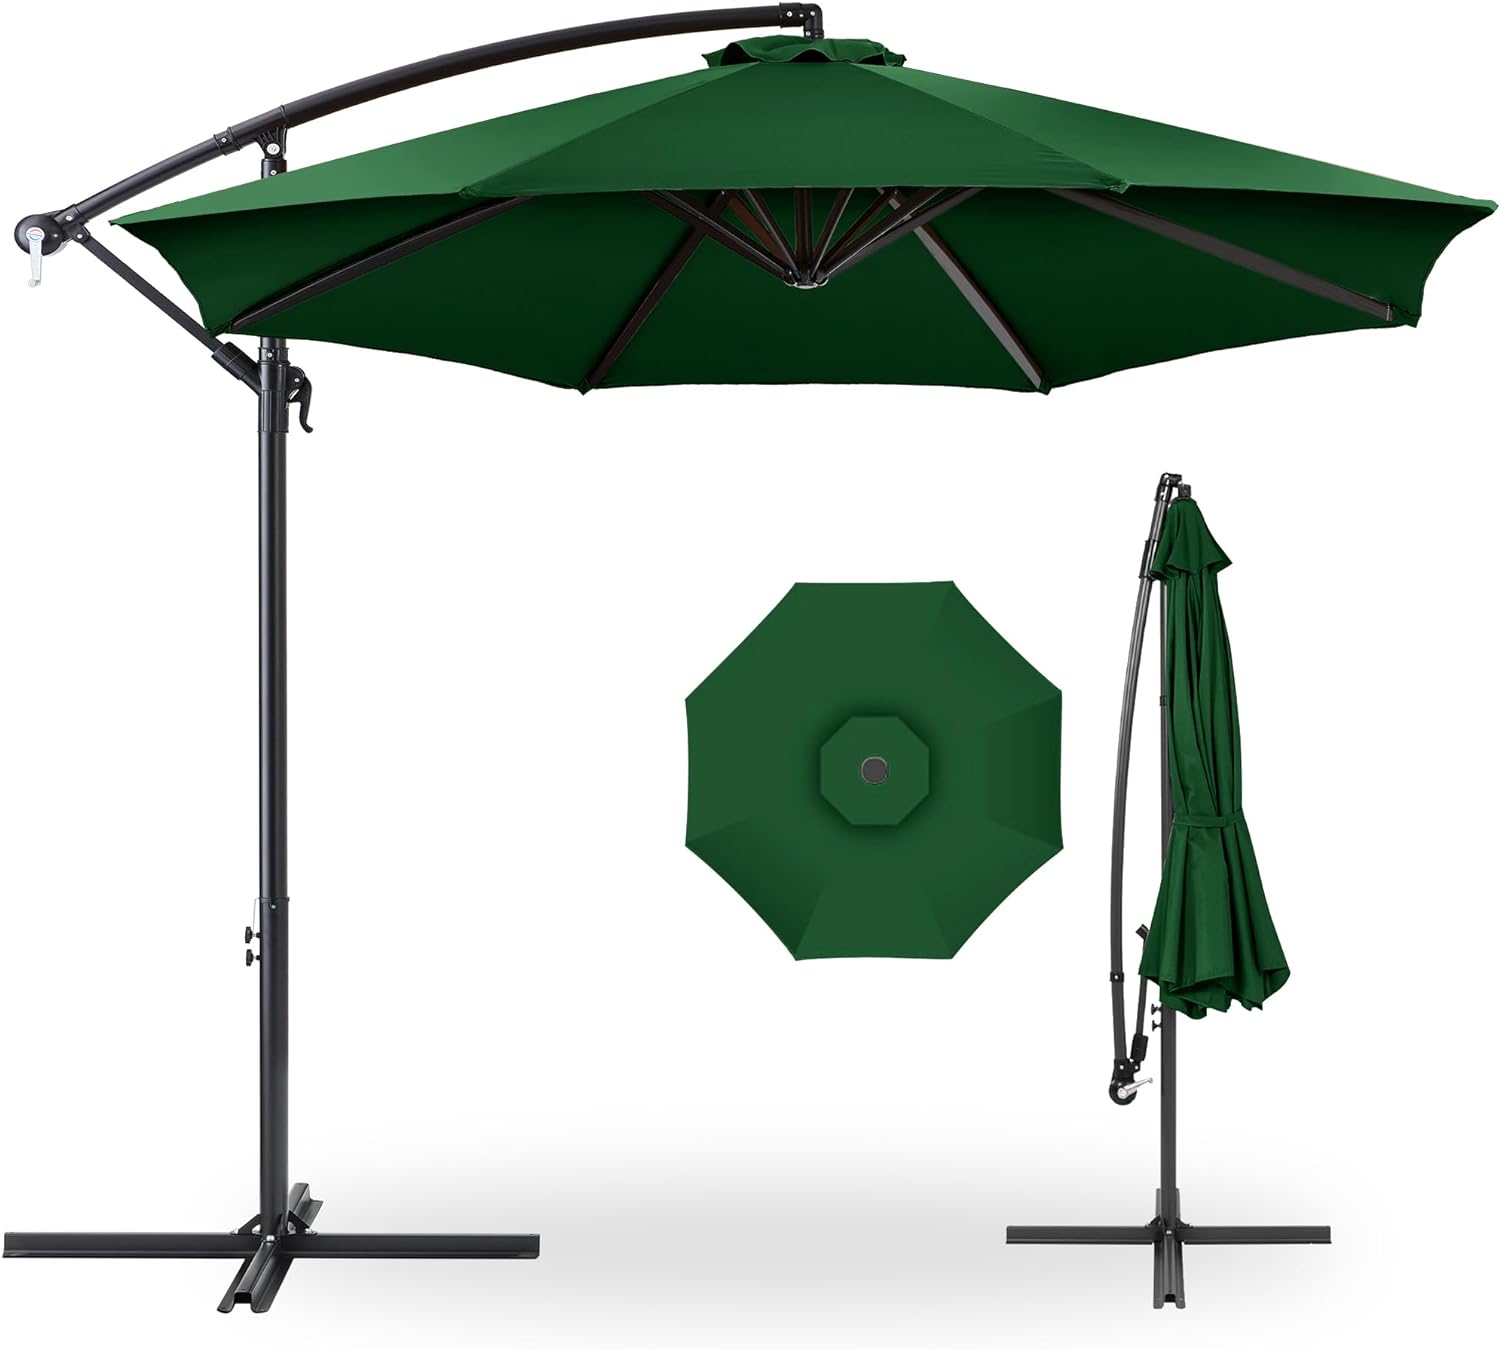 Best Choice Products 10ft Offset Hanging Market Patio Umbrella w/Easy Tilt Adjustment, Polyester Shade, 8 Ribs for Backyard, Poolside, Lawn and Garden